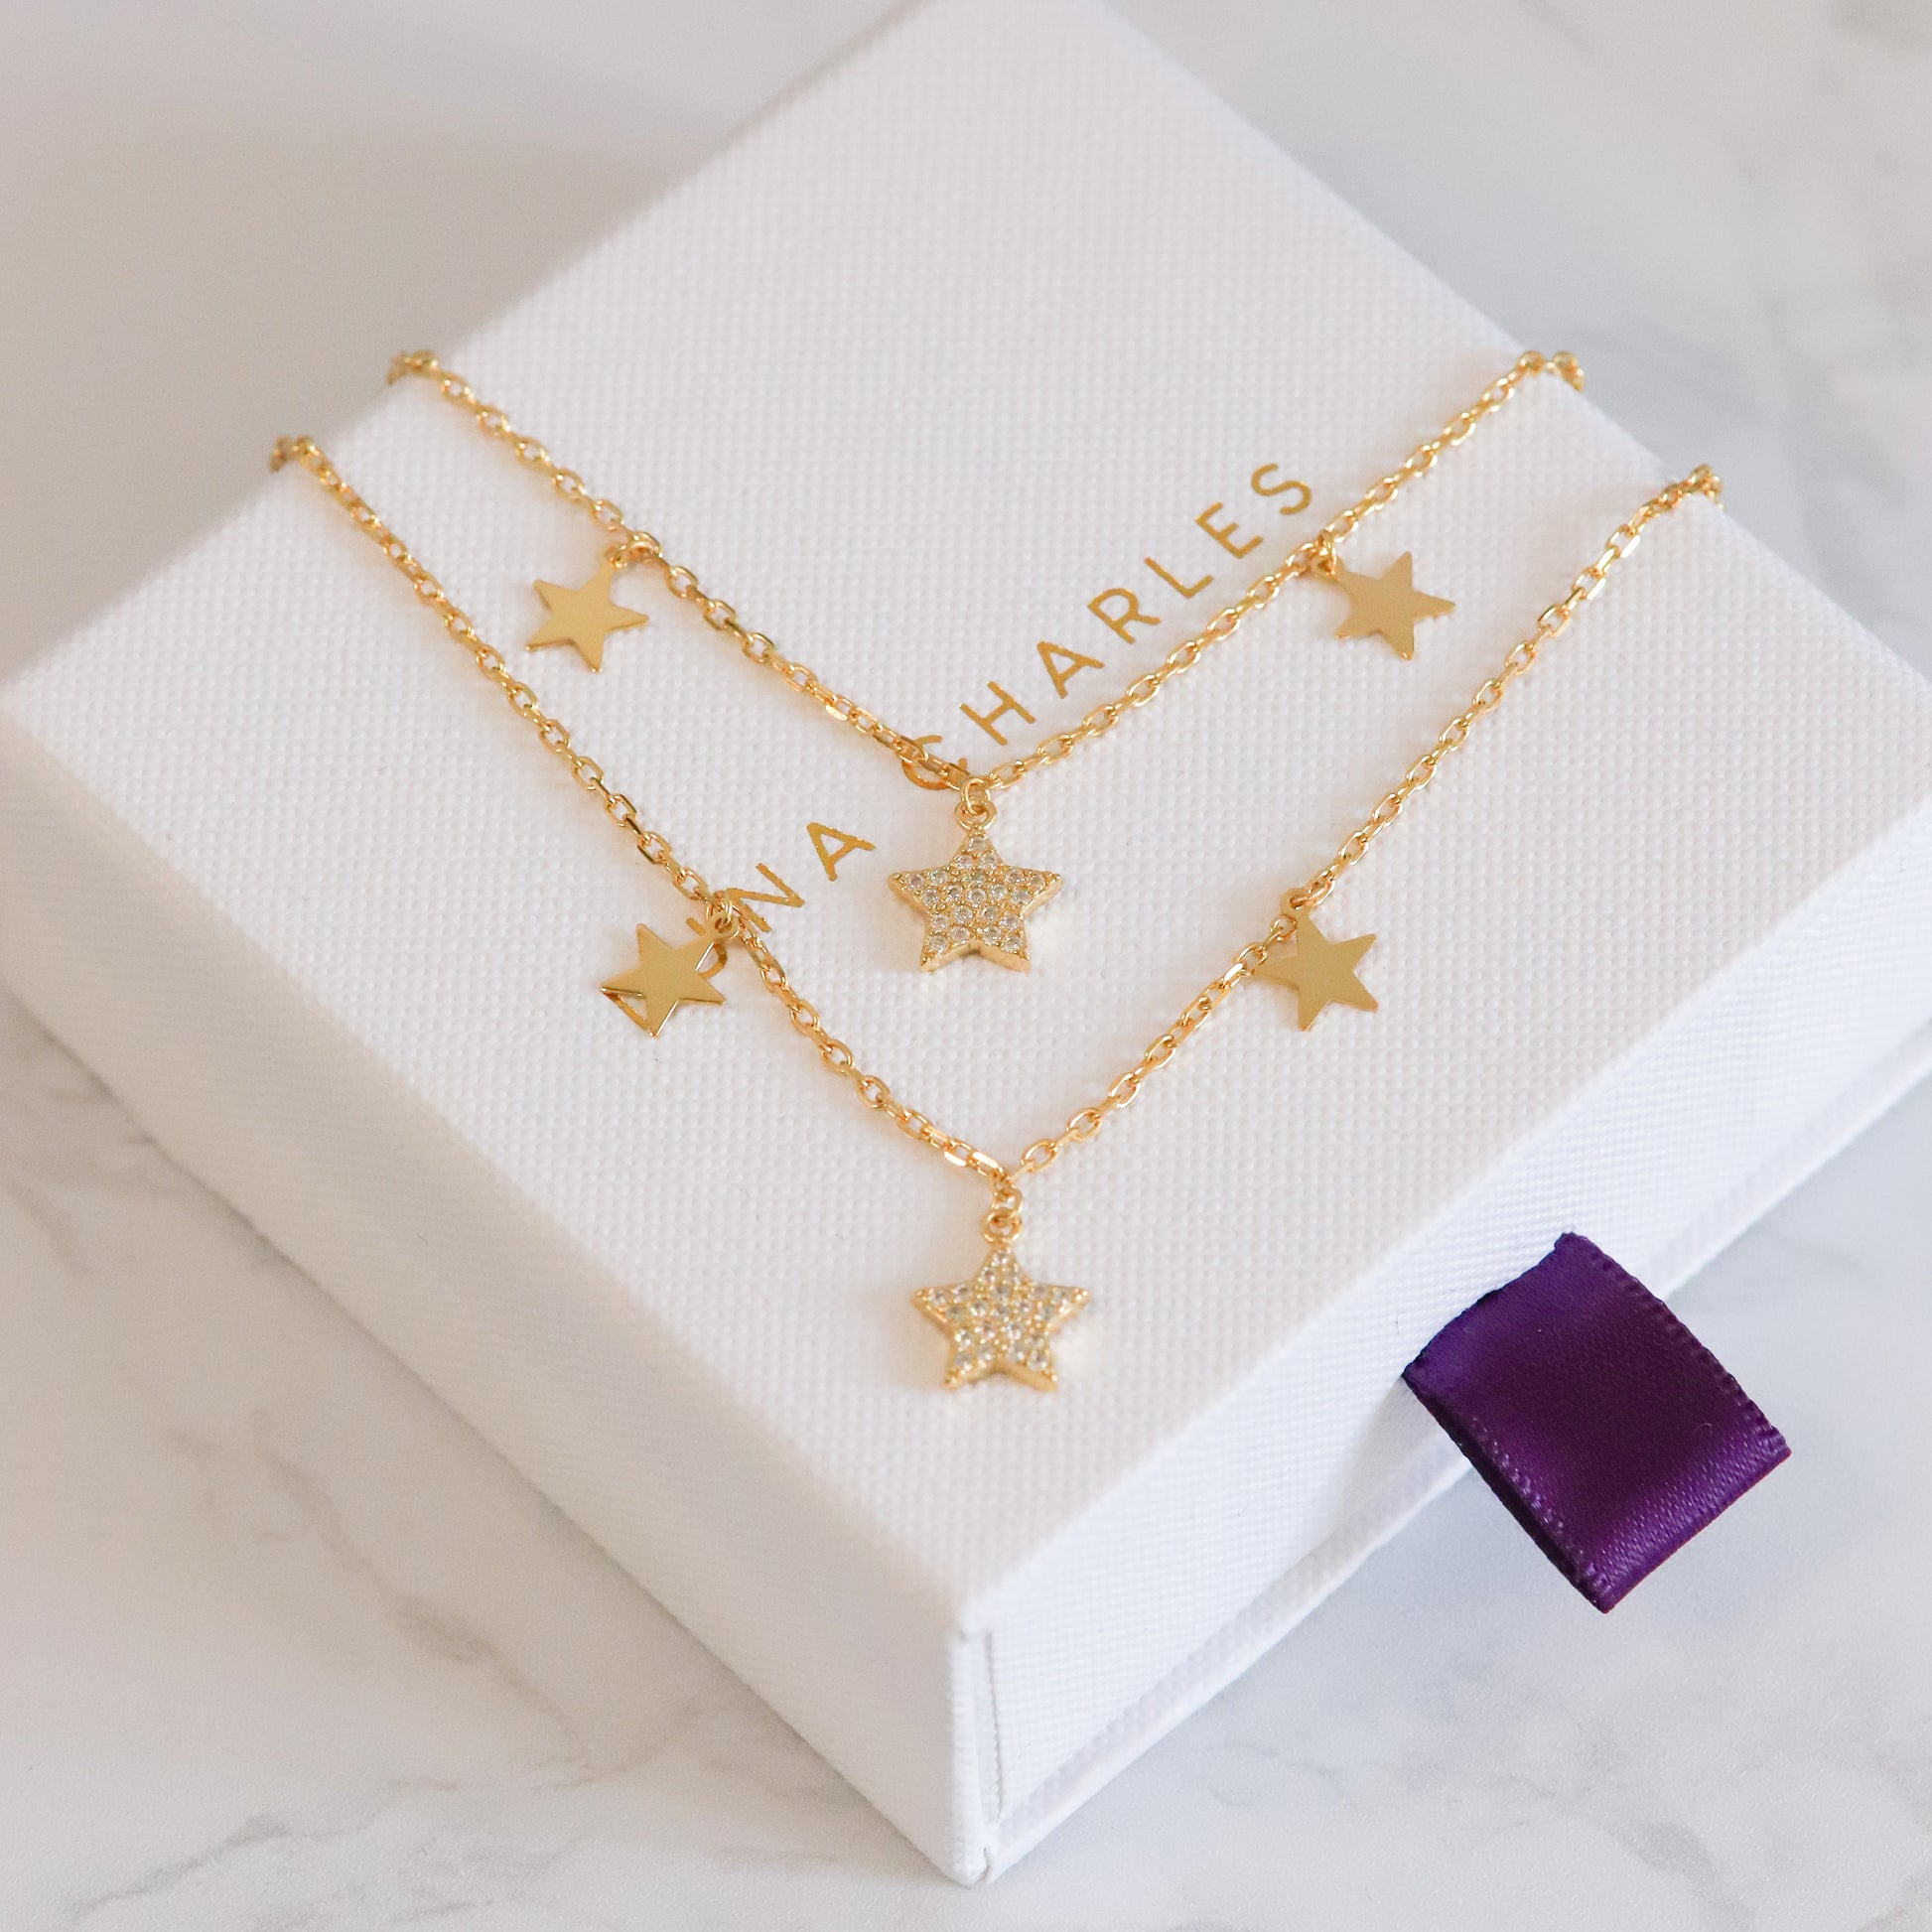 Blake Double Row Star Necklace | 18k Gold Plated